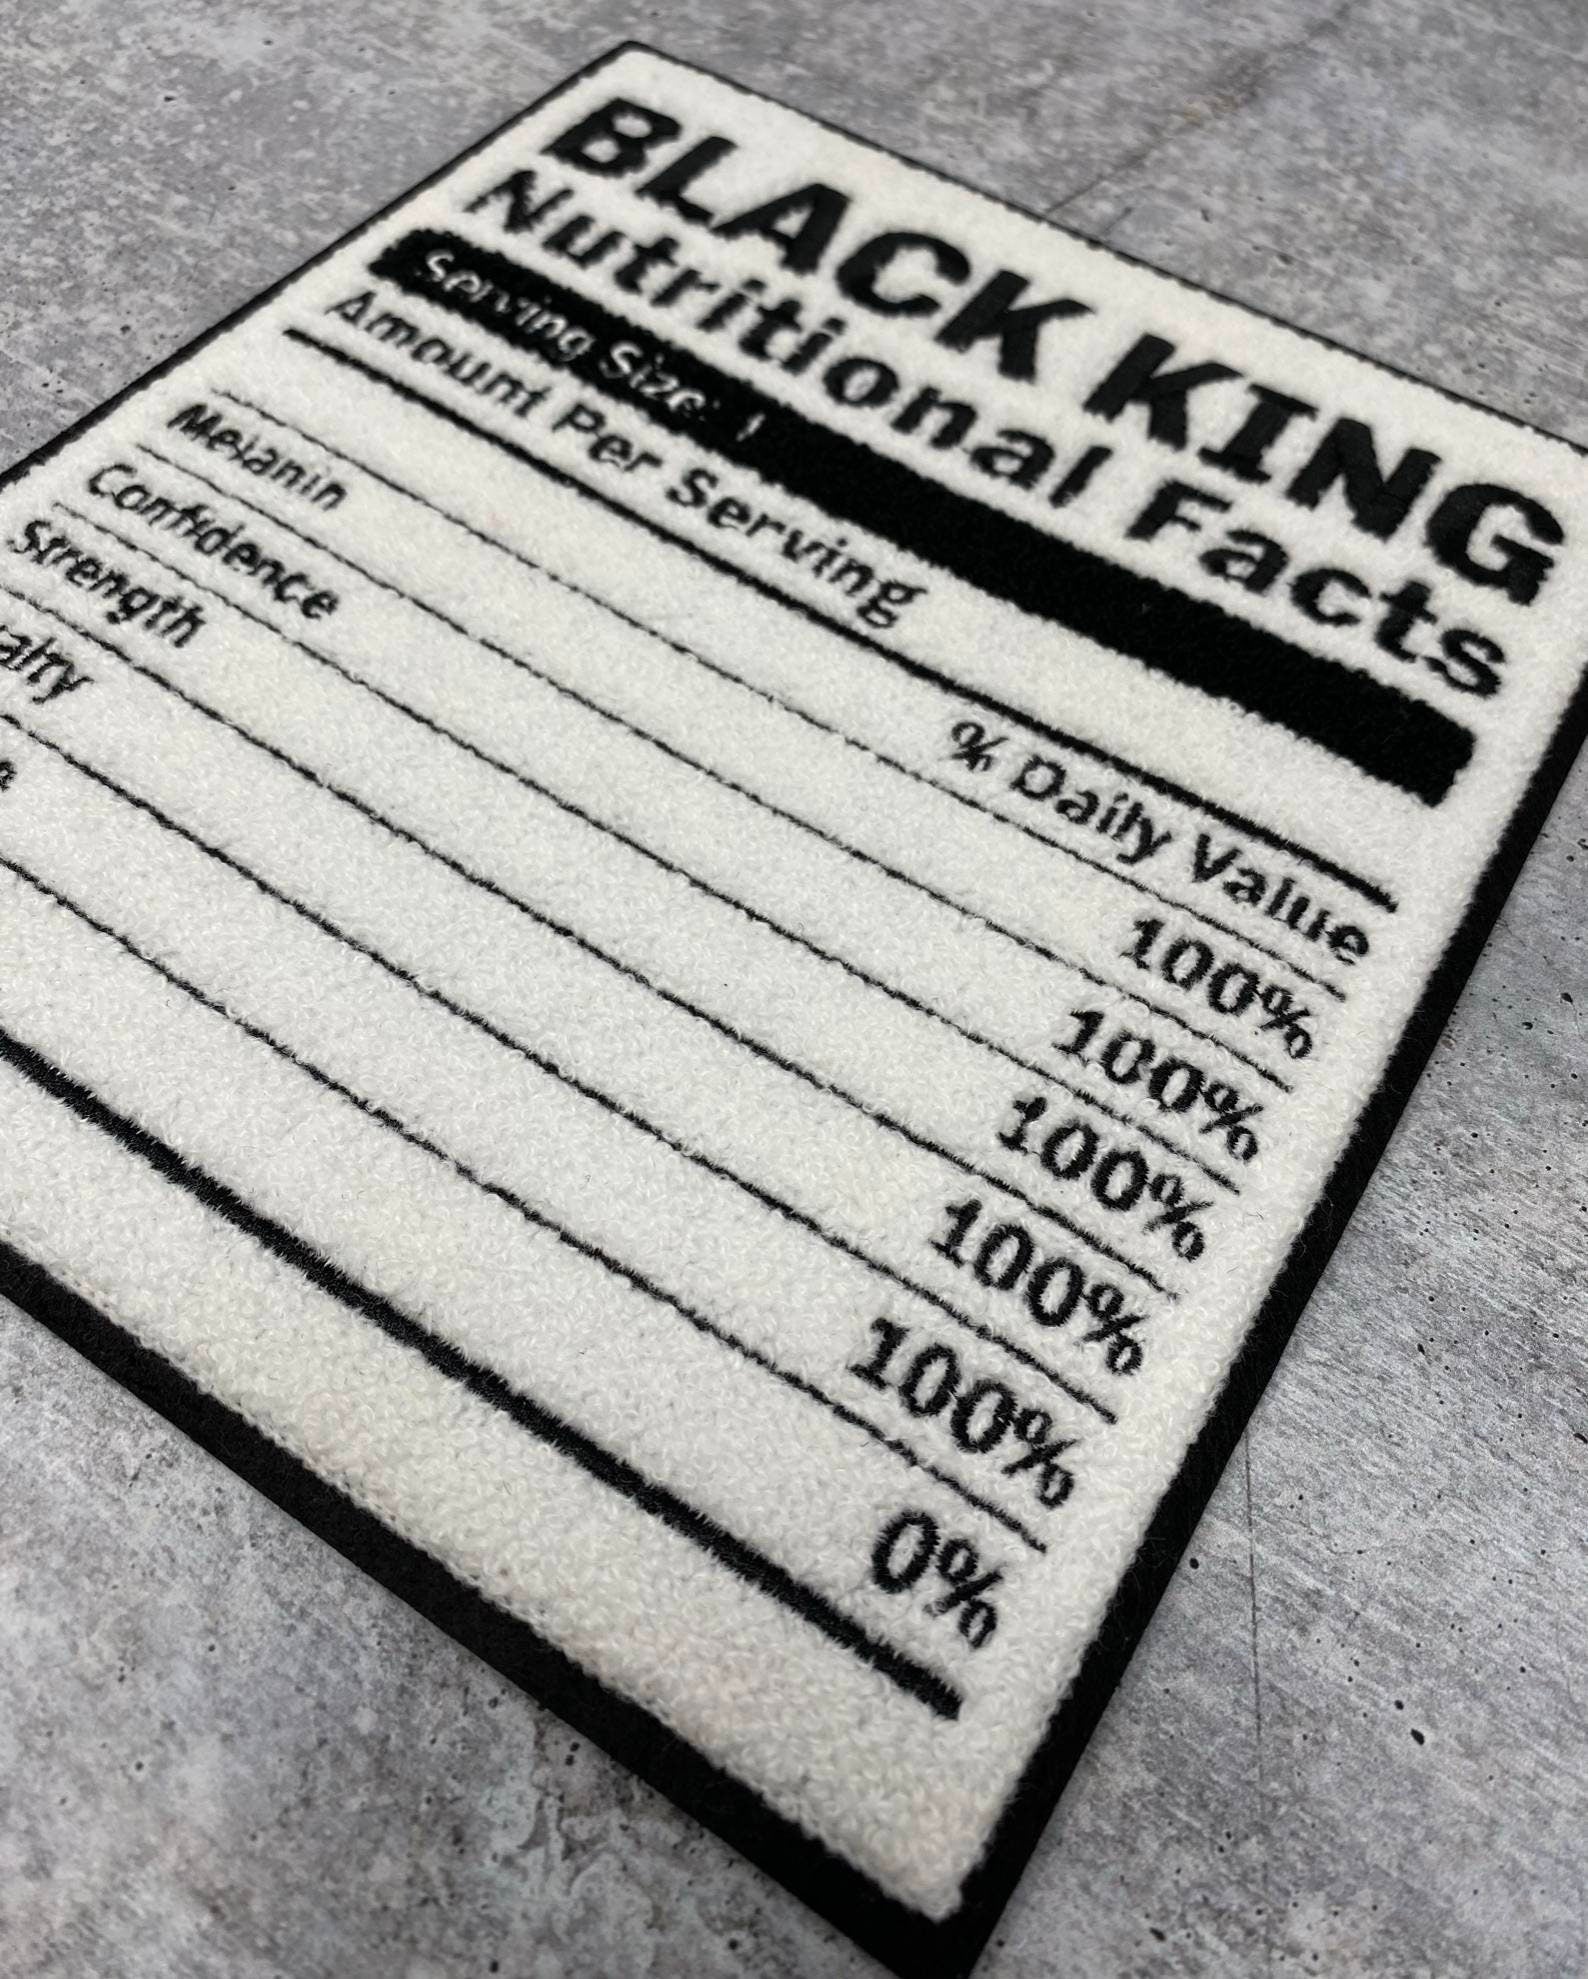 Popular Patch | CHENILLE "Black King Nutritional Facts" Patch, Iron or Sew-on Patch; Africa Patch, Patches for Men, Size 8.5", Varsity Patch